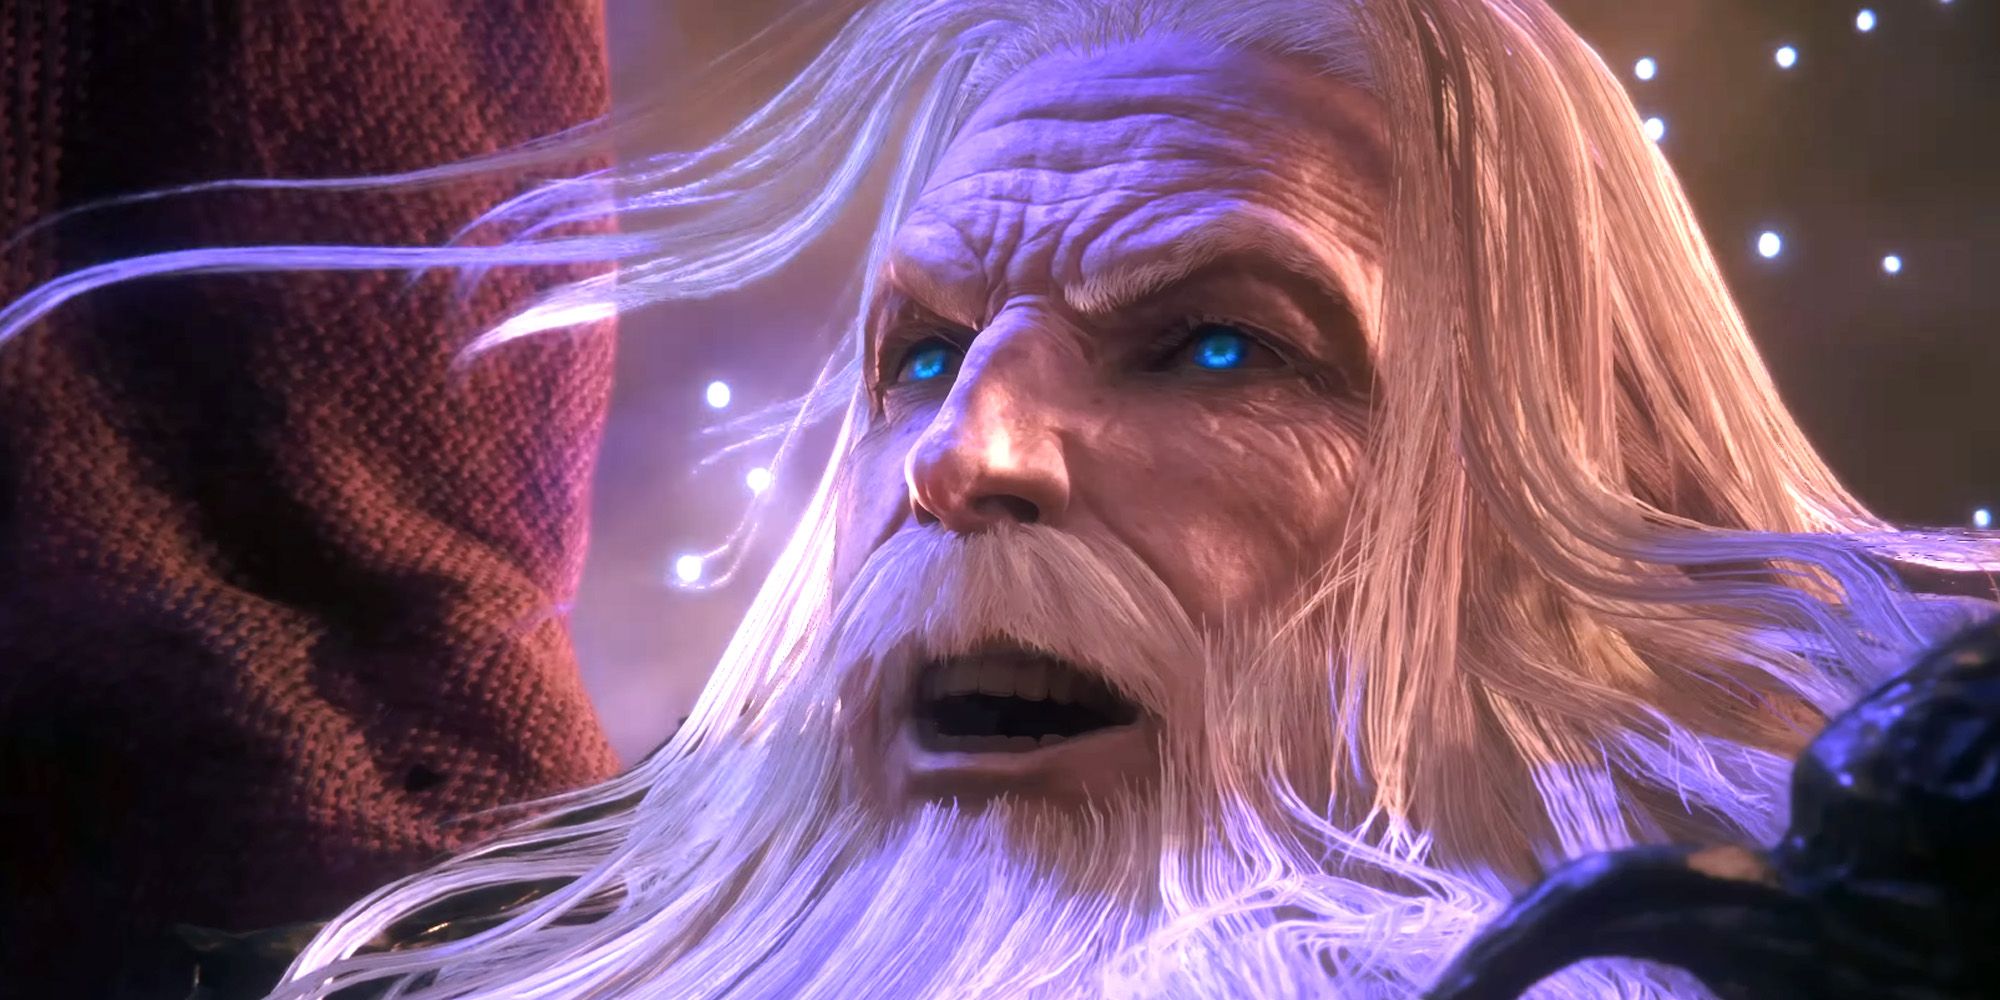 A close-up of the Eikon Ramuh in Final Fantasy 16, appearing as an elderly man with long white hair and beard and bright blue eyes.